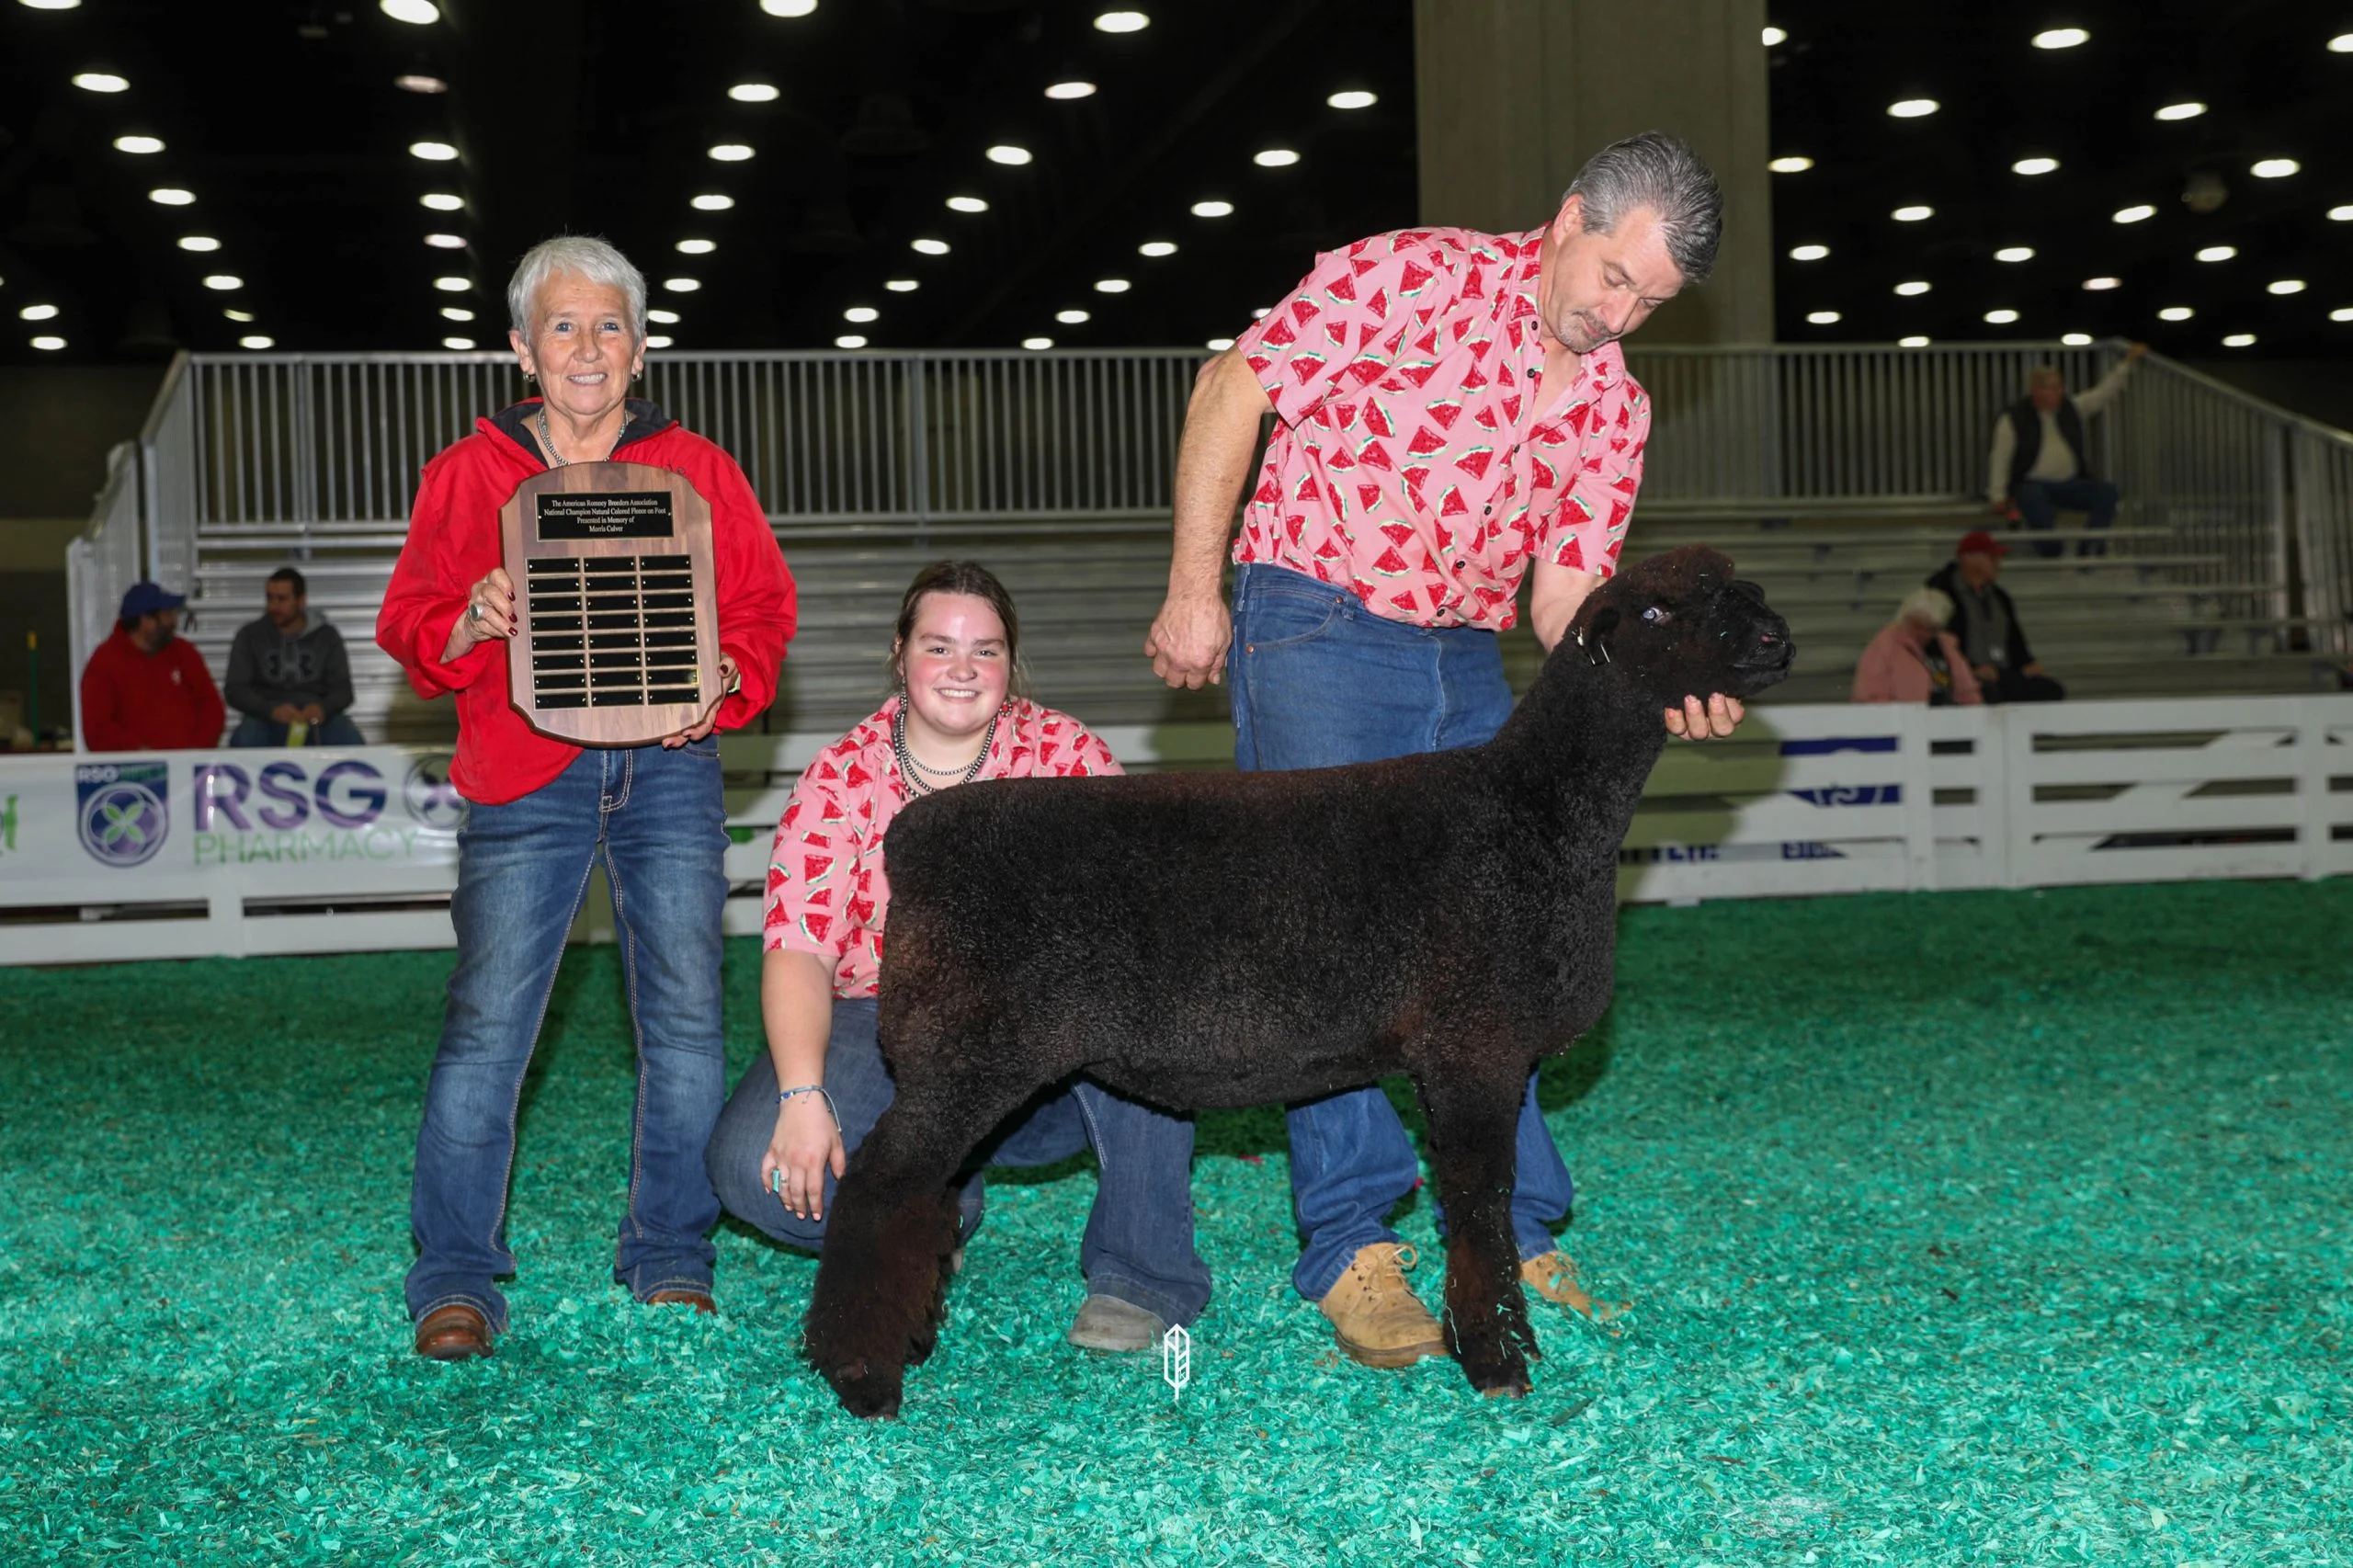 2023 National White Romney Show at NAILE
Best Fleeced Natural Colored Romney exhibited by Caitlin Plank